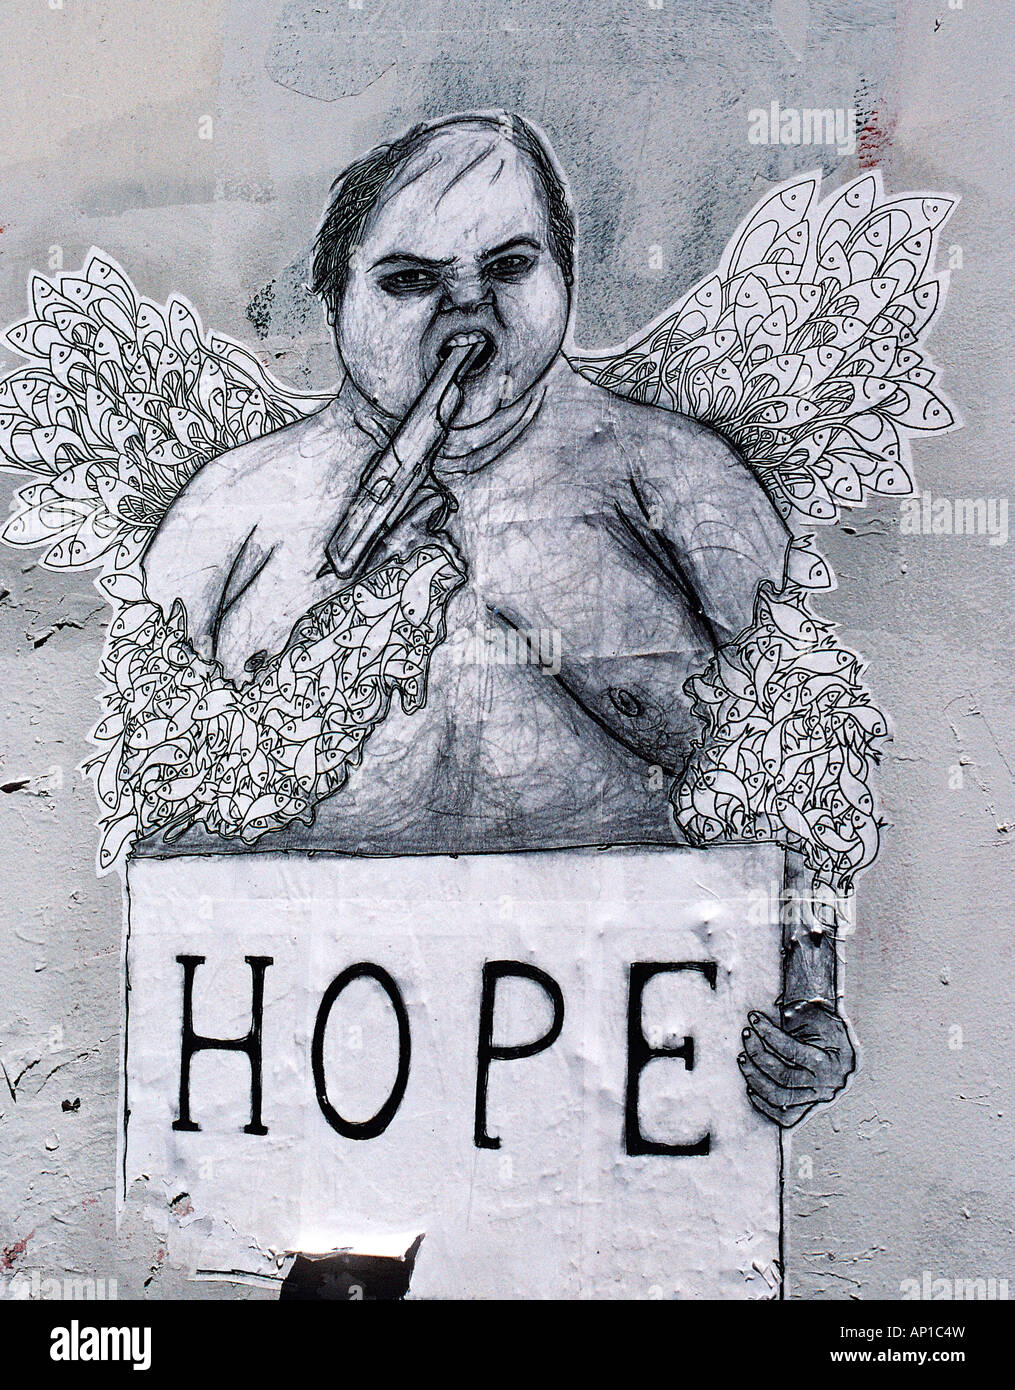 A graffiti of a suicidal angel which refers to hope Stock Photo